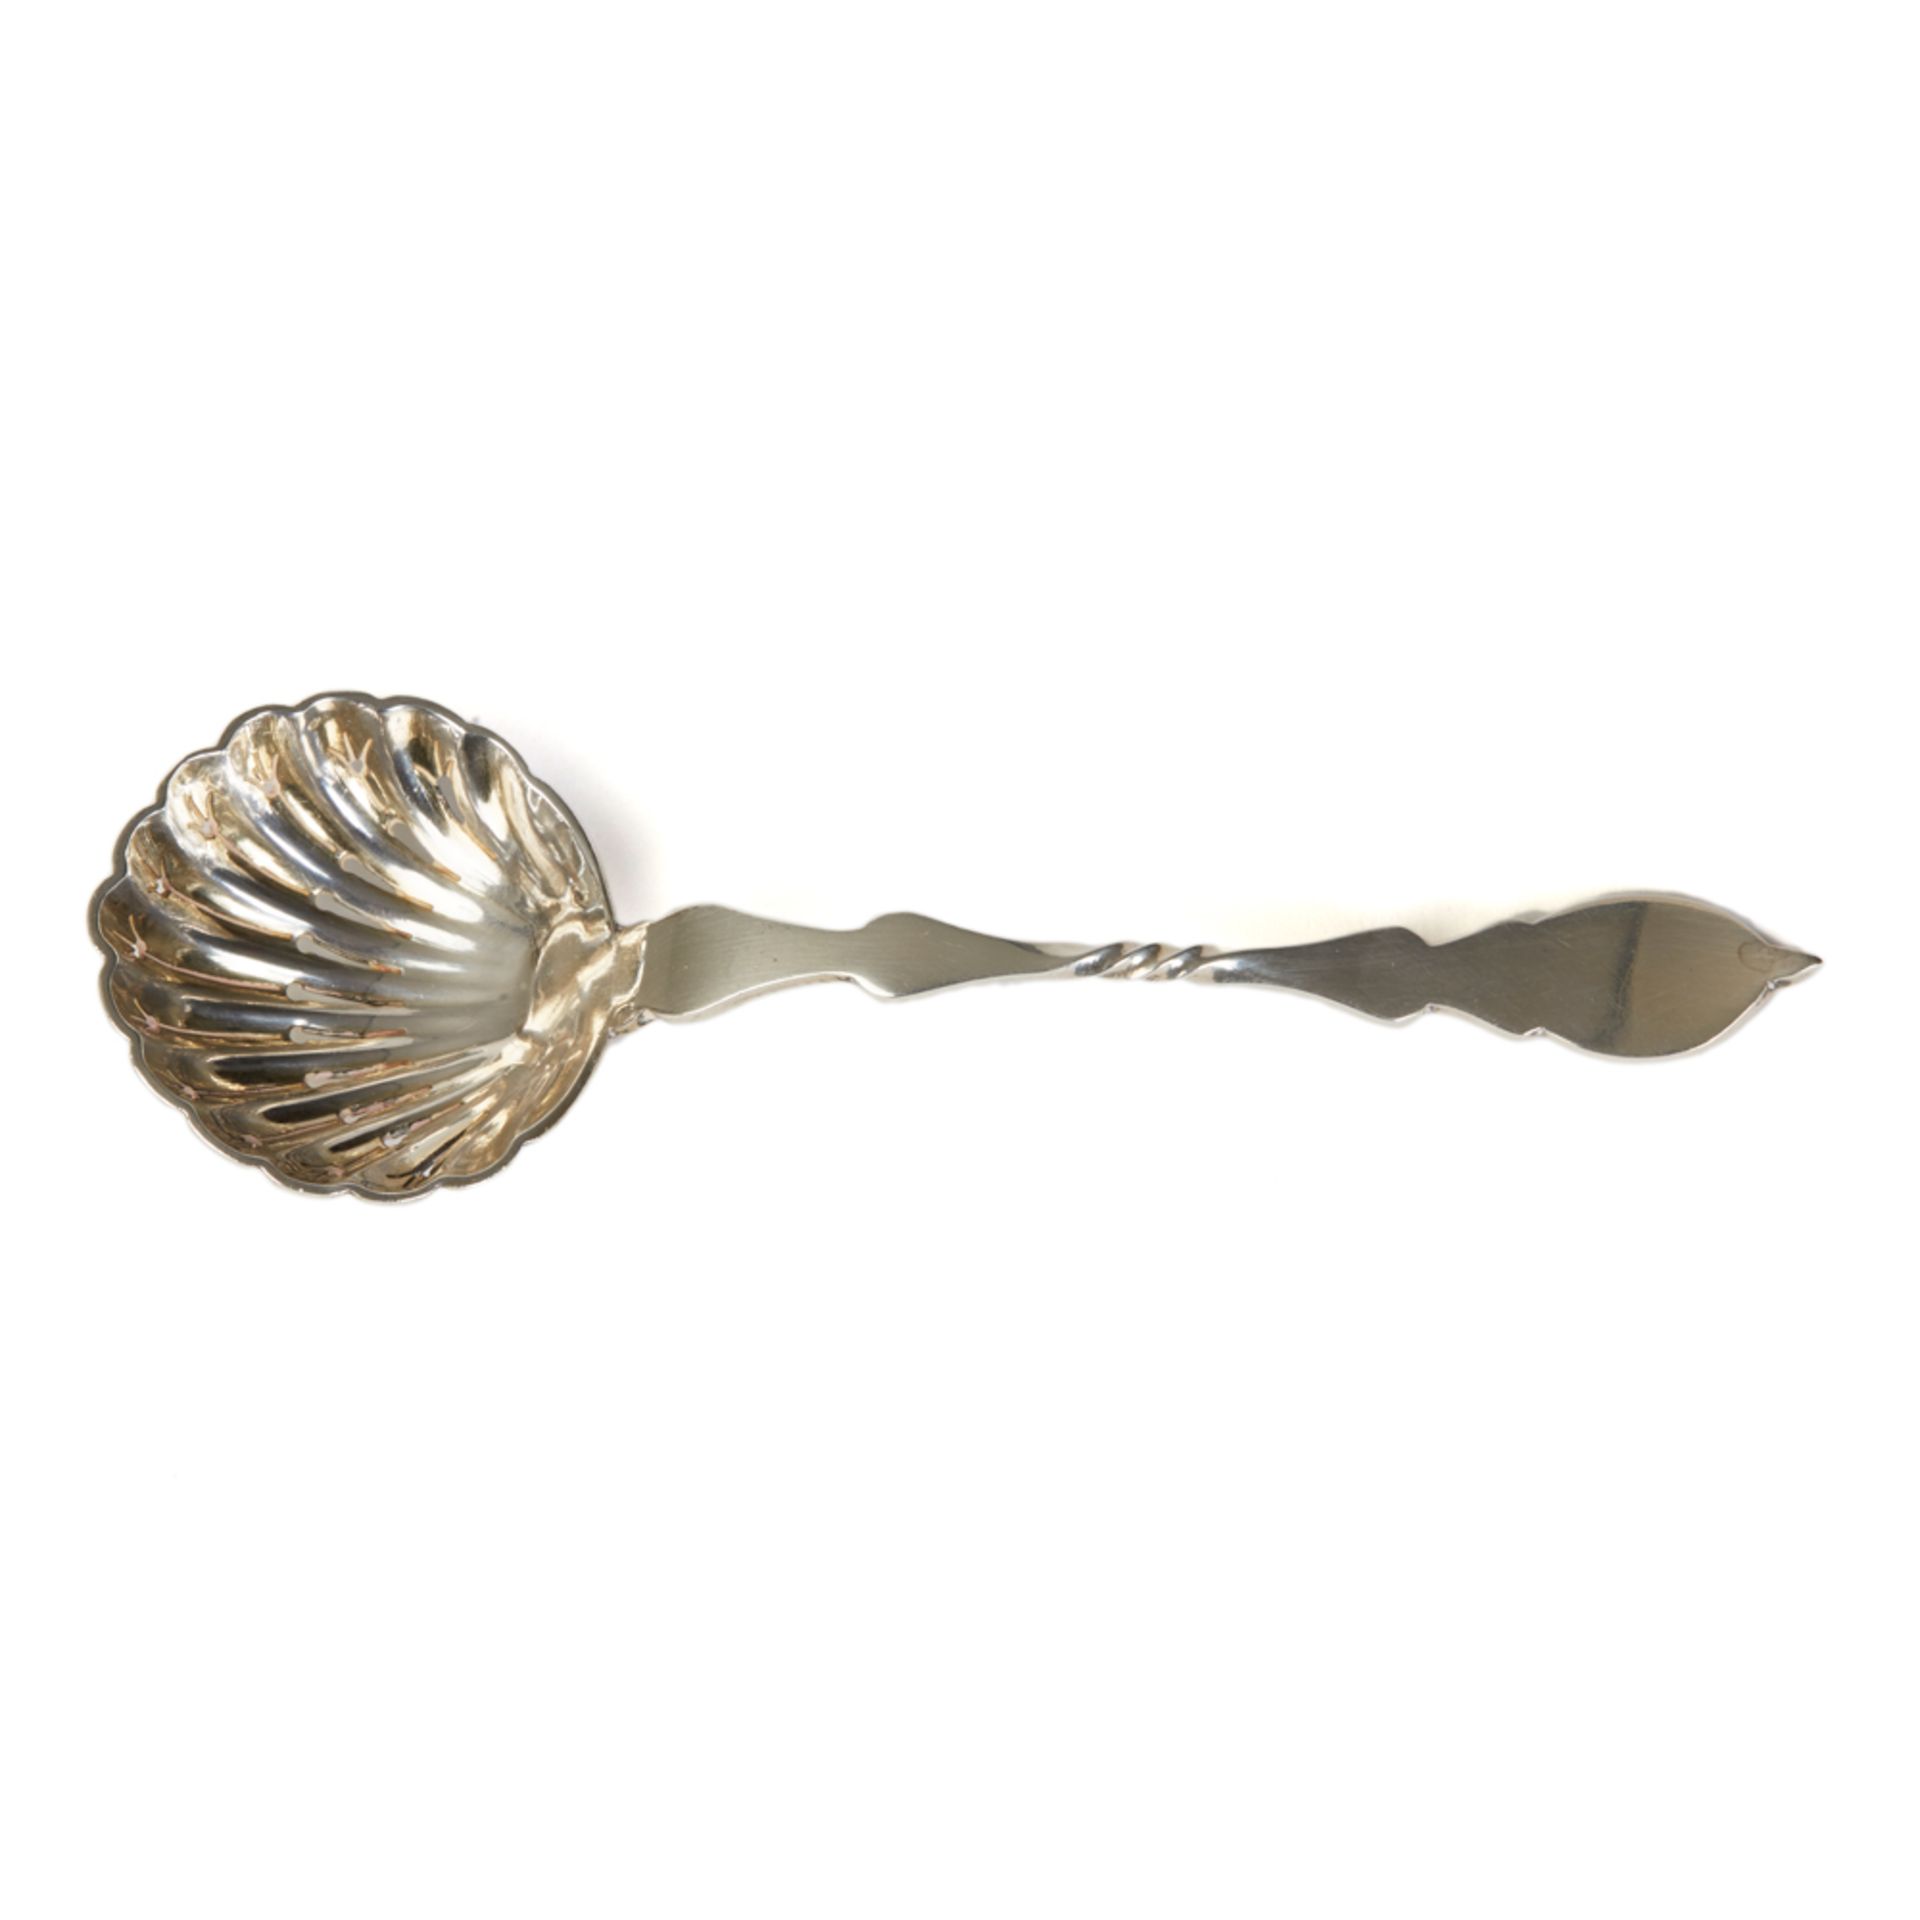 Vintage Mappin & Webb Quality Silver Sifter Ladle 1923 - Image 3 of 6